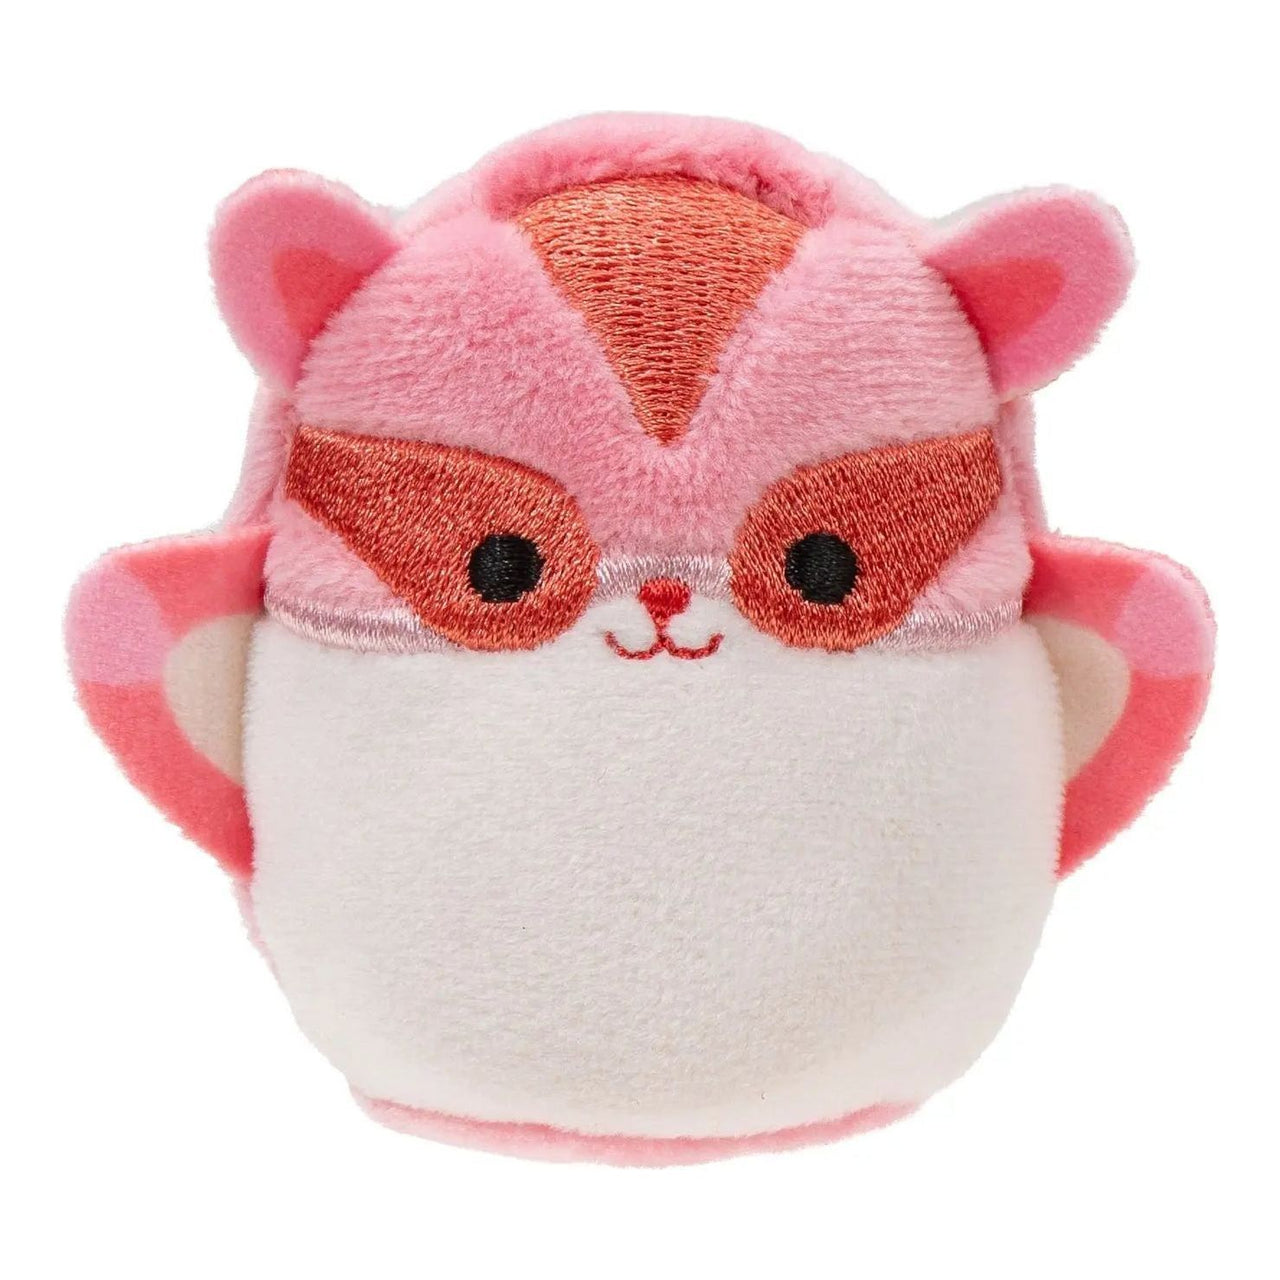 Squishville 2" Cute & Colourful 6 Pack Squishmallows